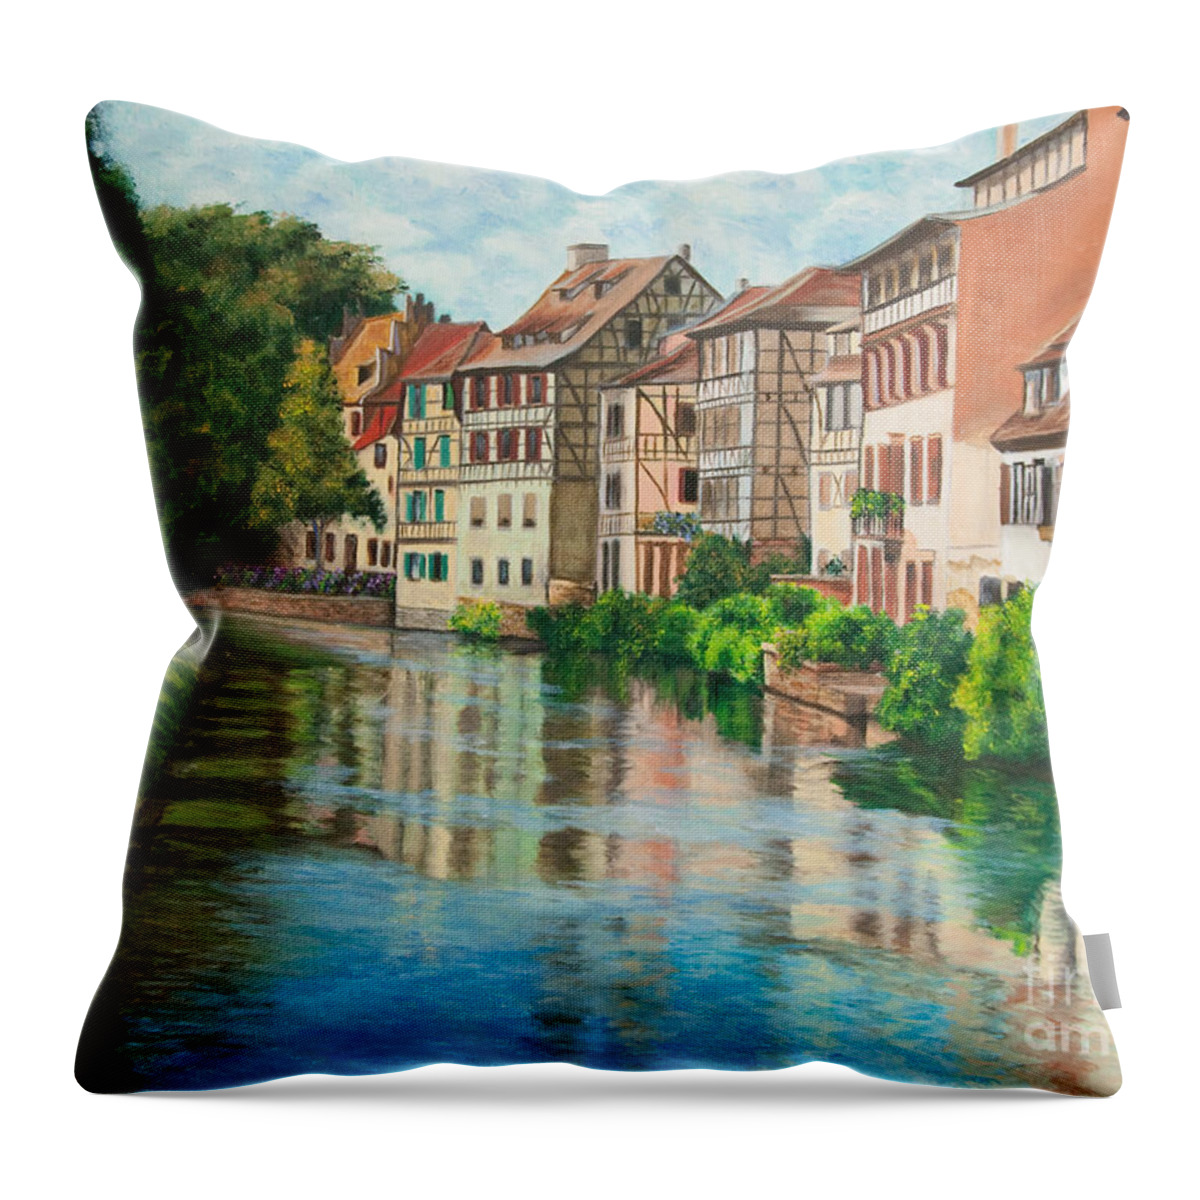 Strasbourg France Art Throw Pillow featuring the painting Reflections Of Strasbourg by Charlotte Blanchard